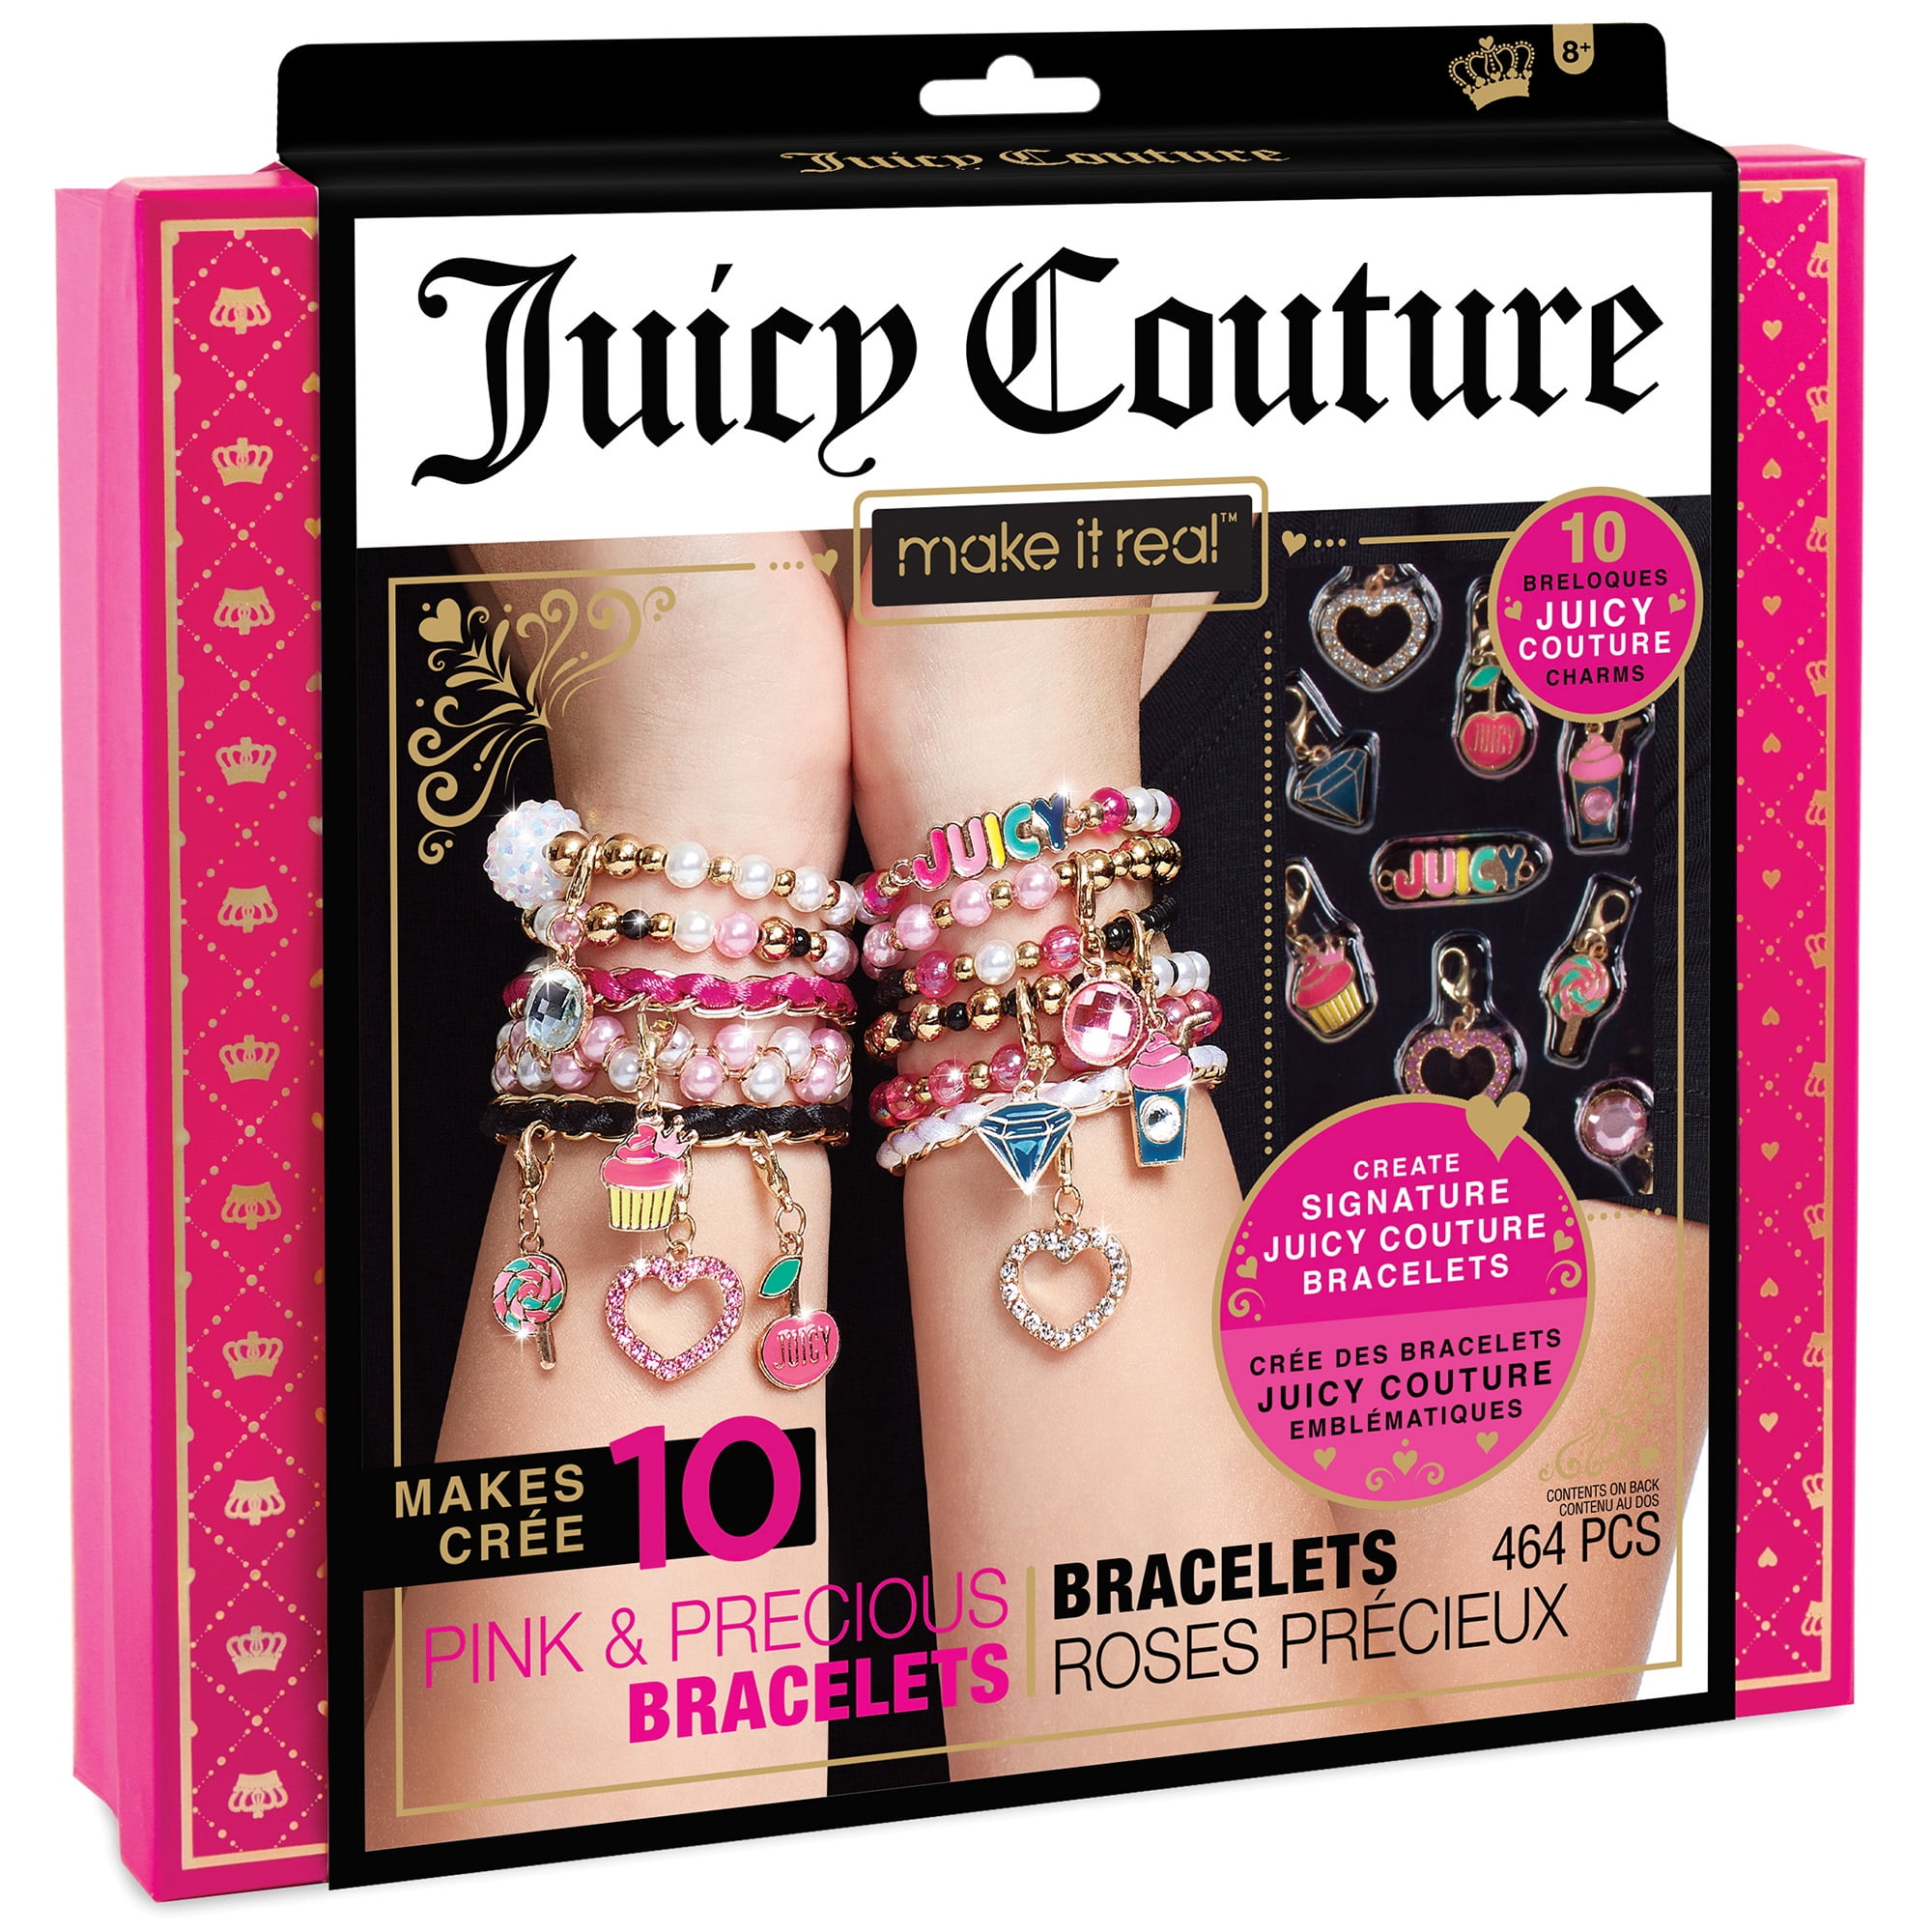 Charm Bracelet Jewelry Making Kit, Ages 8+: Gift Idea For